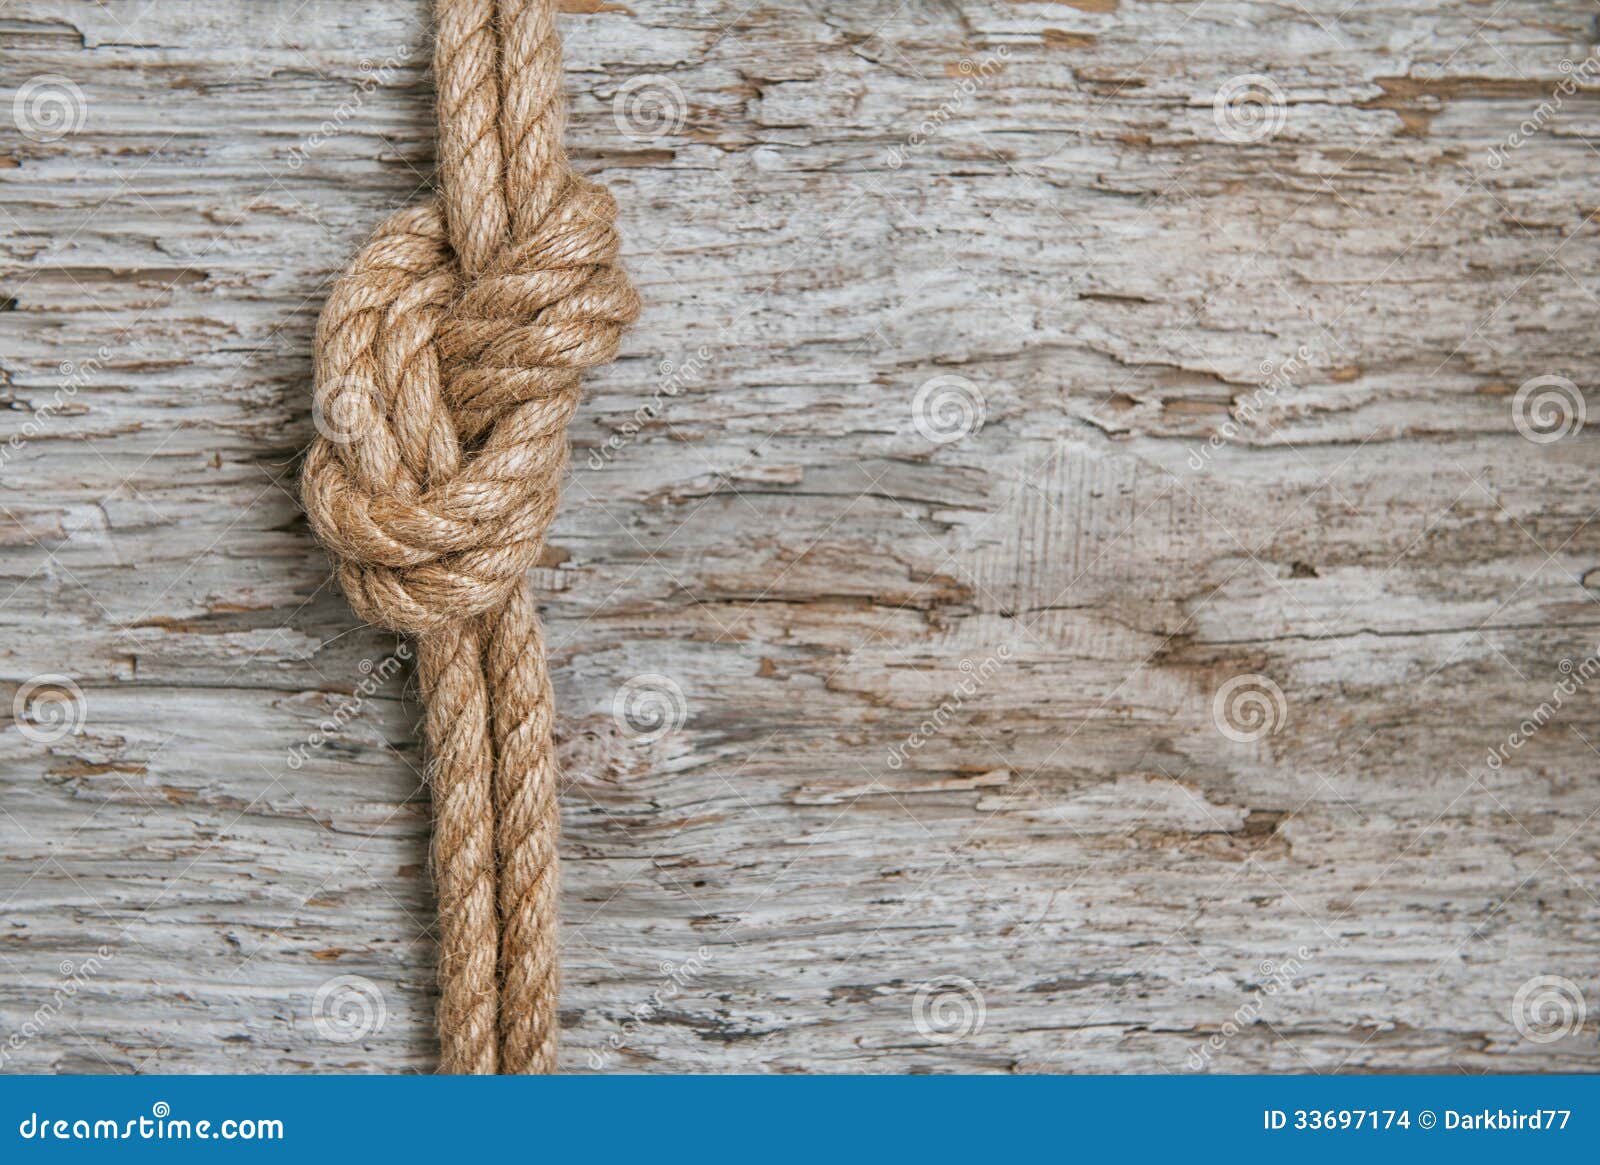 Ship Rope and Wood Background Stock Photo - Image of pattern